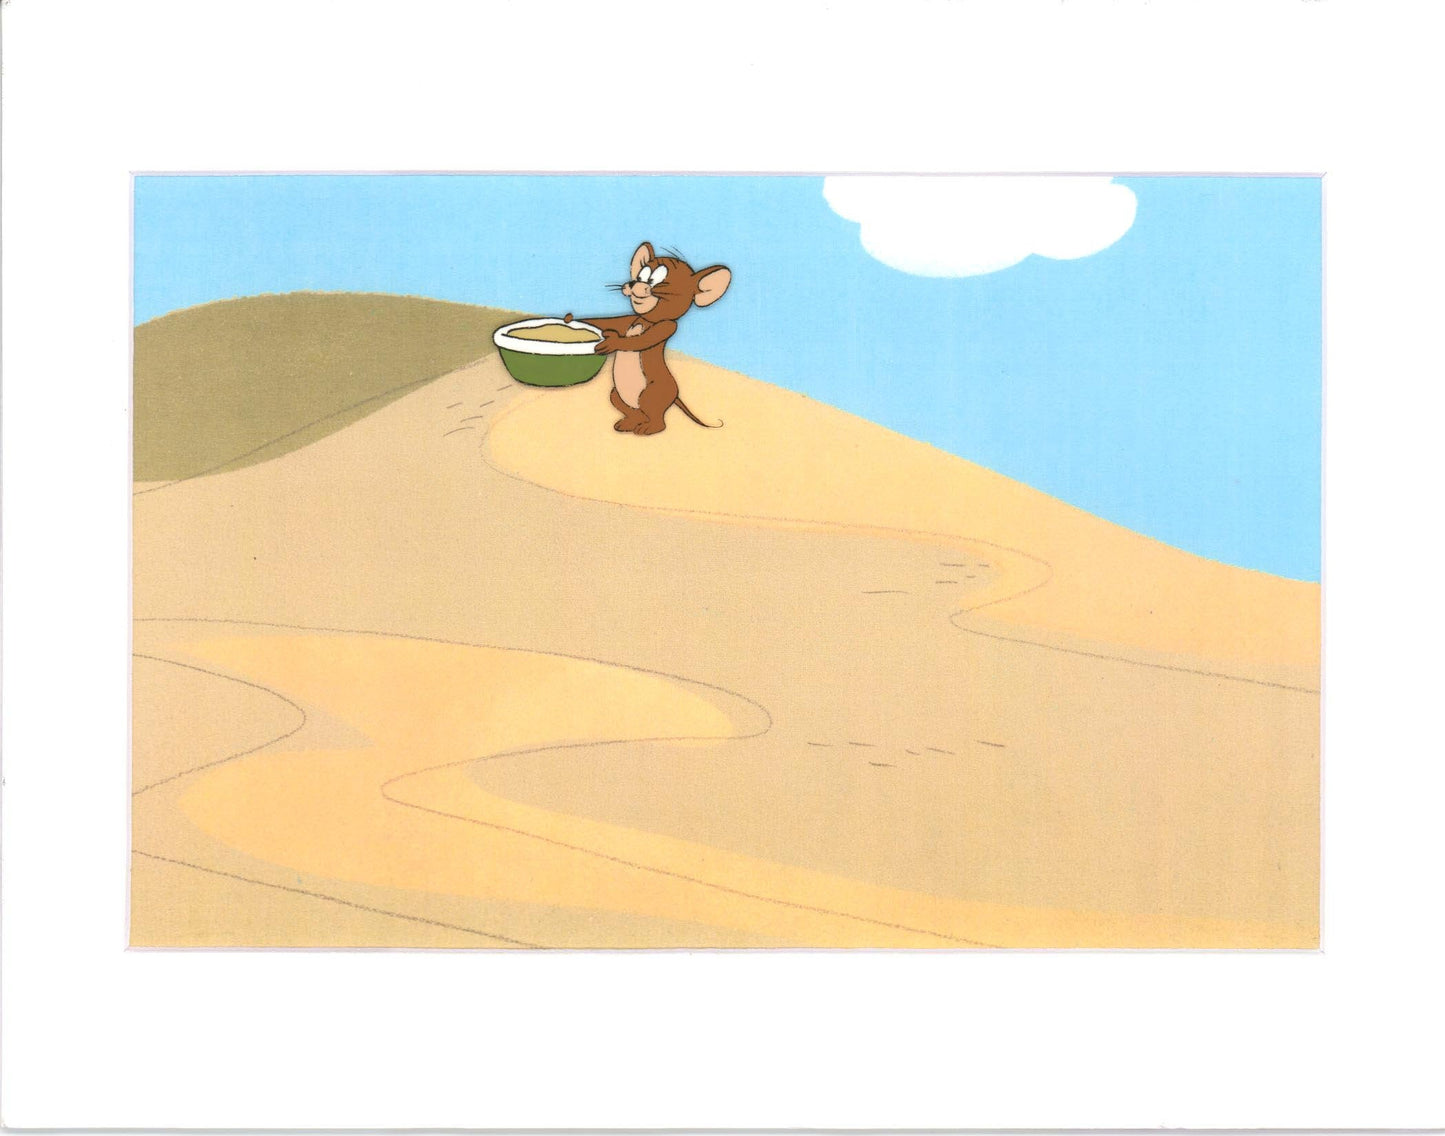 Tom & Jerry Original Production Animation Cel from Filmation 1980-82 b4539